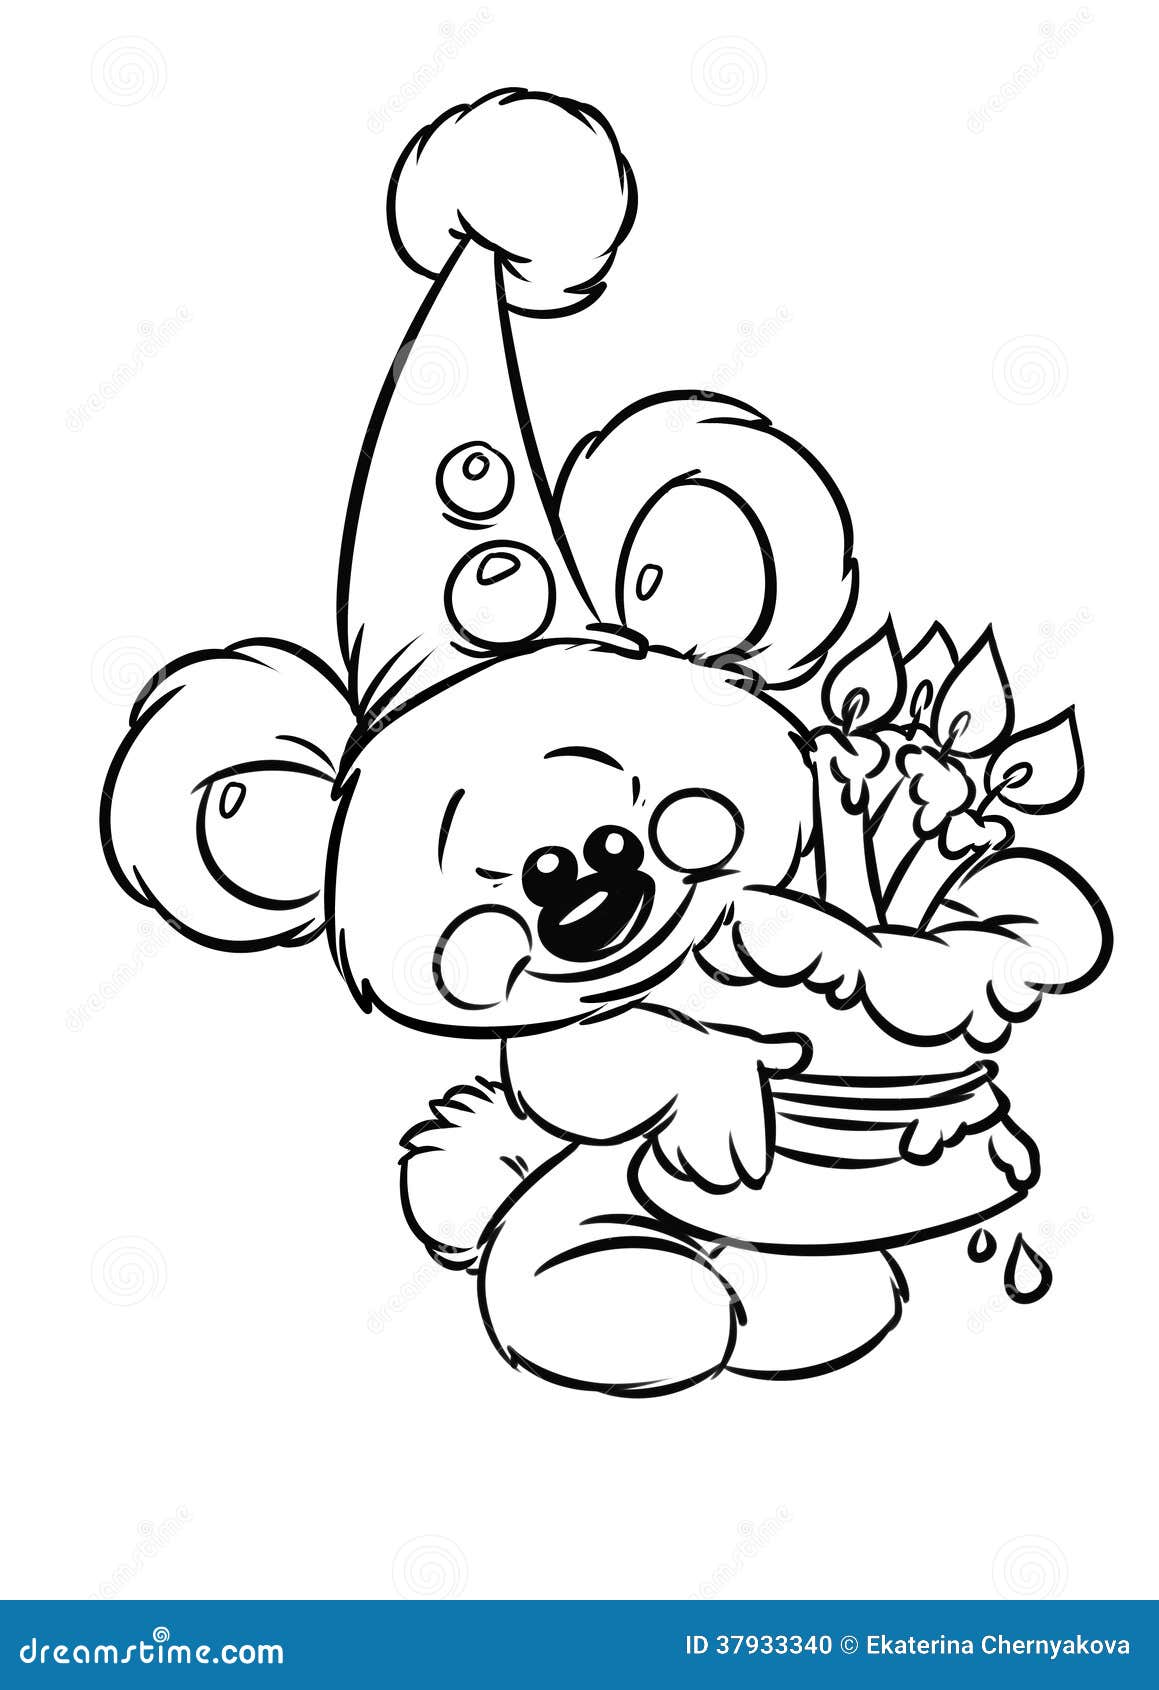 monoply coloring pages - photo #23